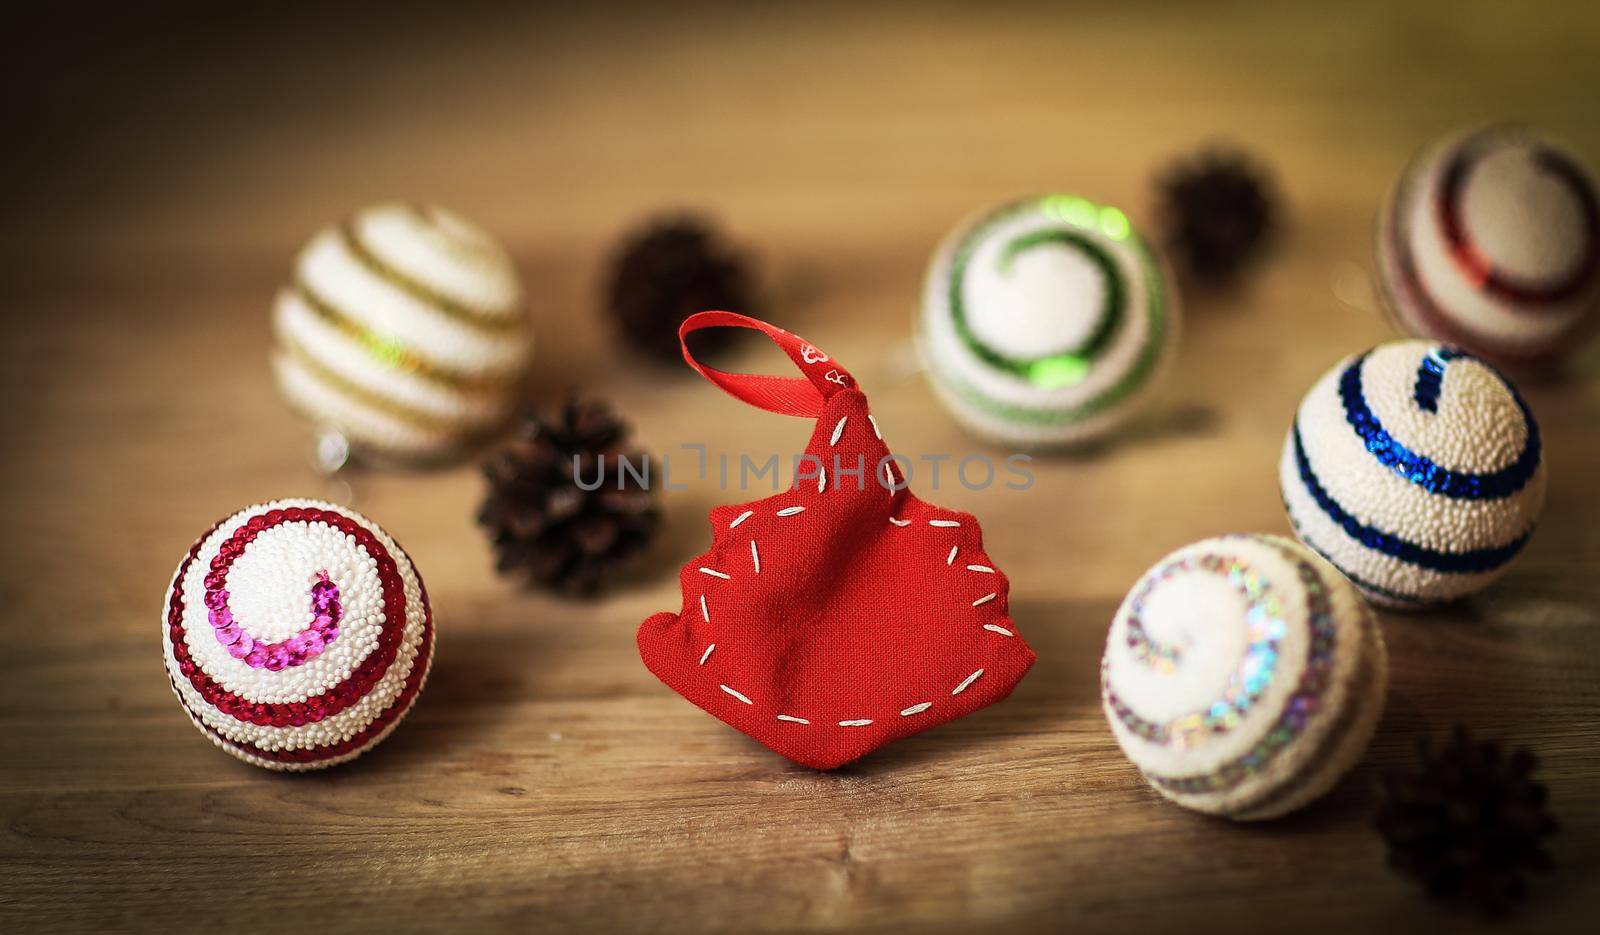 Christmas balls and dyeing at the Christmas table by SmartPhotoLab